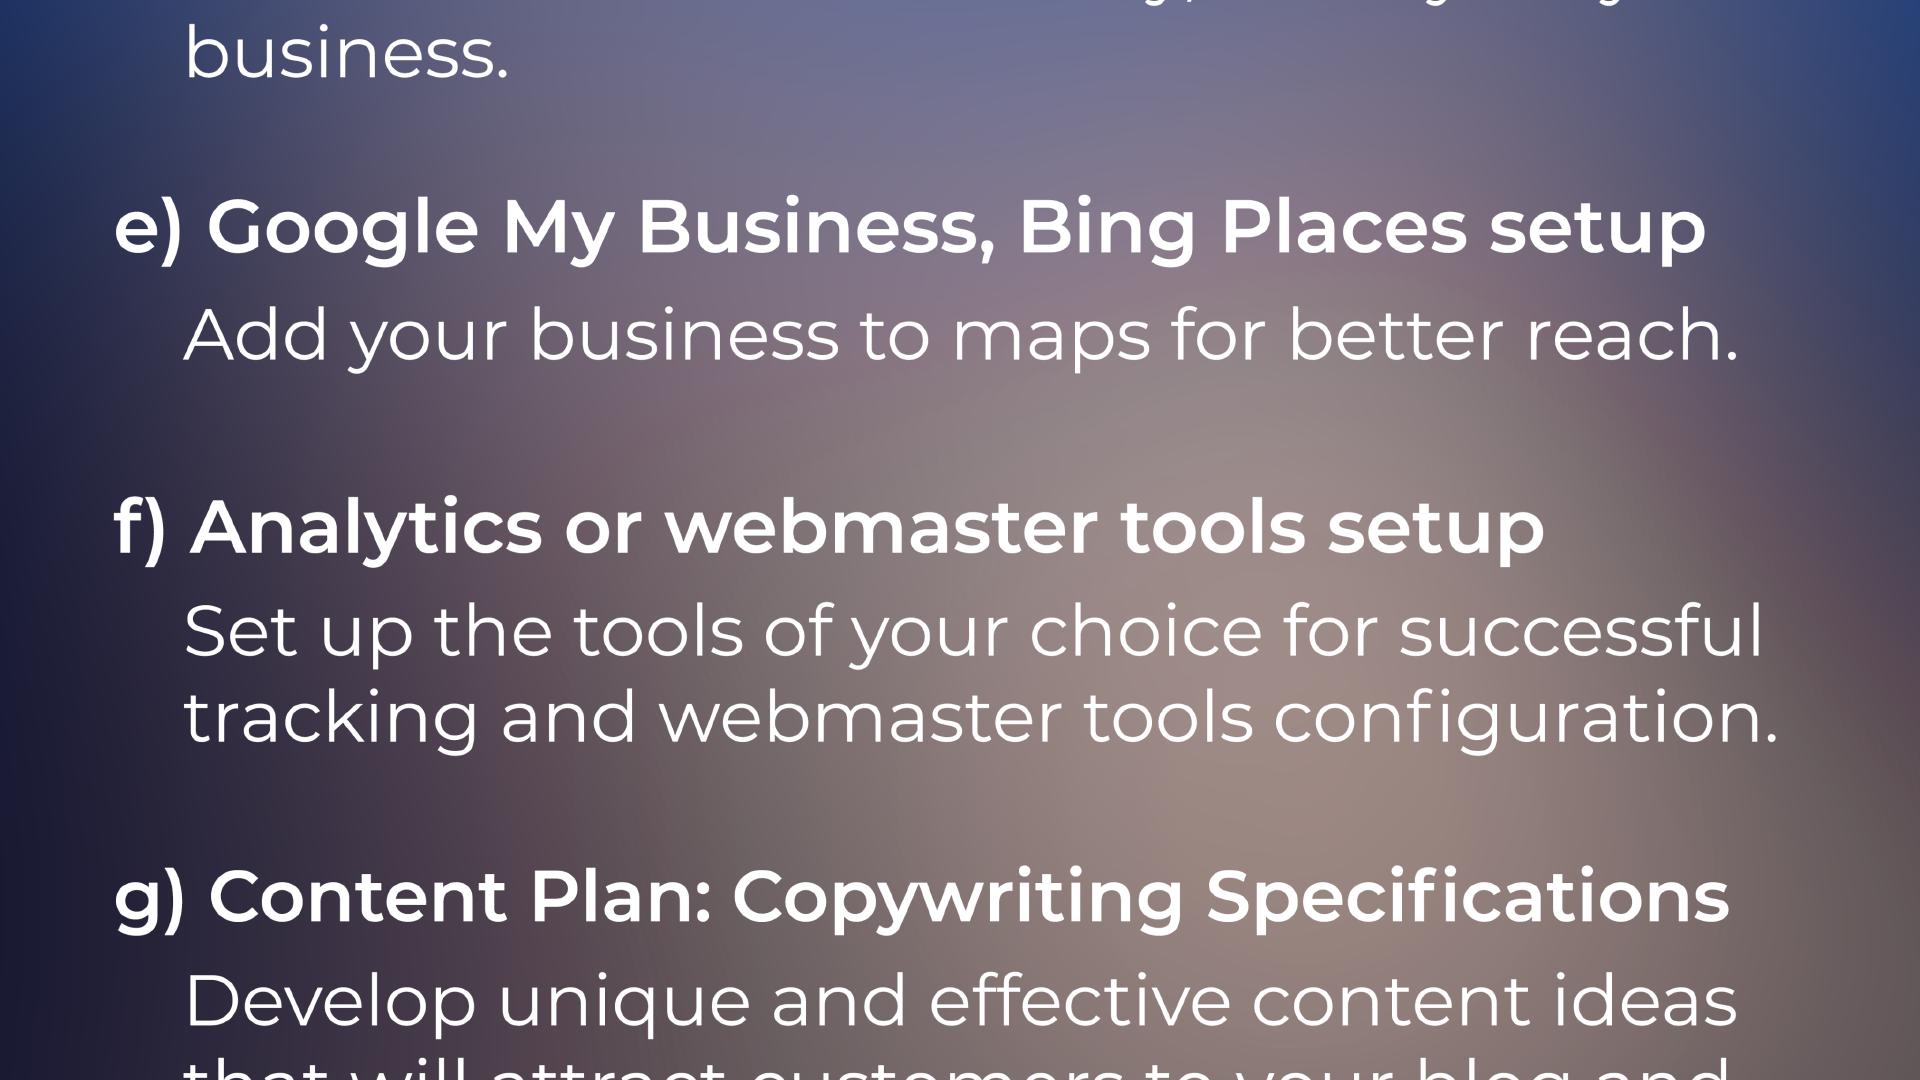 e) Google My Business, Bing Places setup: Add your business to maps for better reach. f) Analytics or webmaster tools setup Set up the tools of your choice for successful tracking and webmaster tools configuration. g) Content Plan - Copywriting Specifications: Develop unique and effective content ideas ...